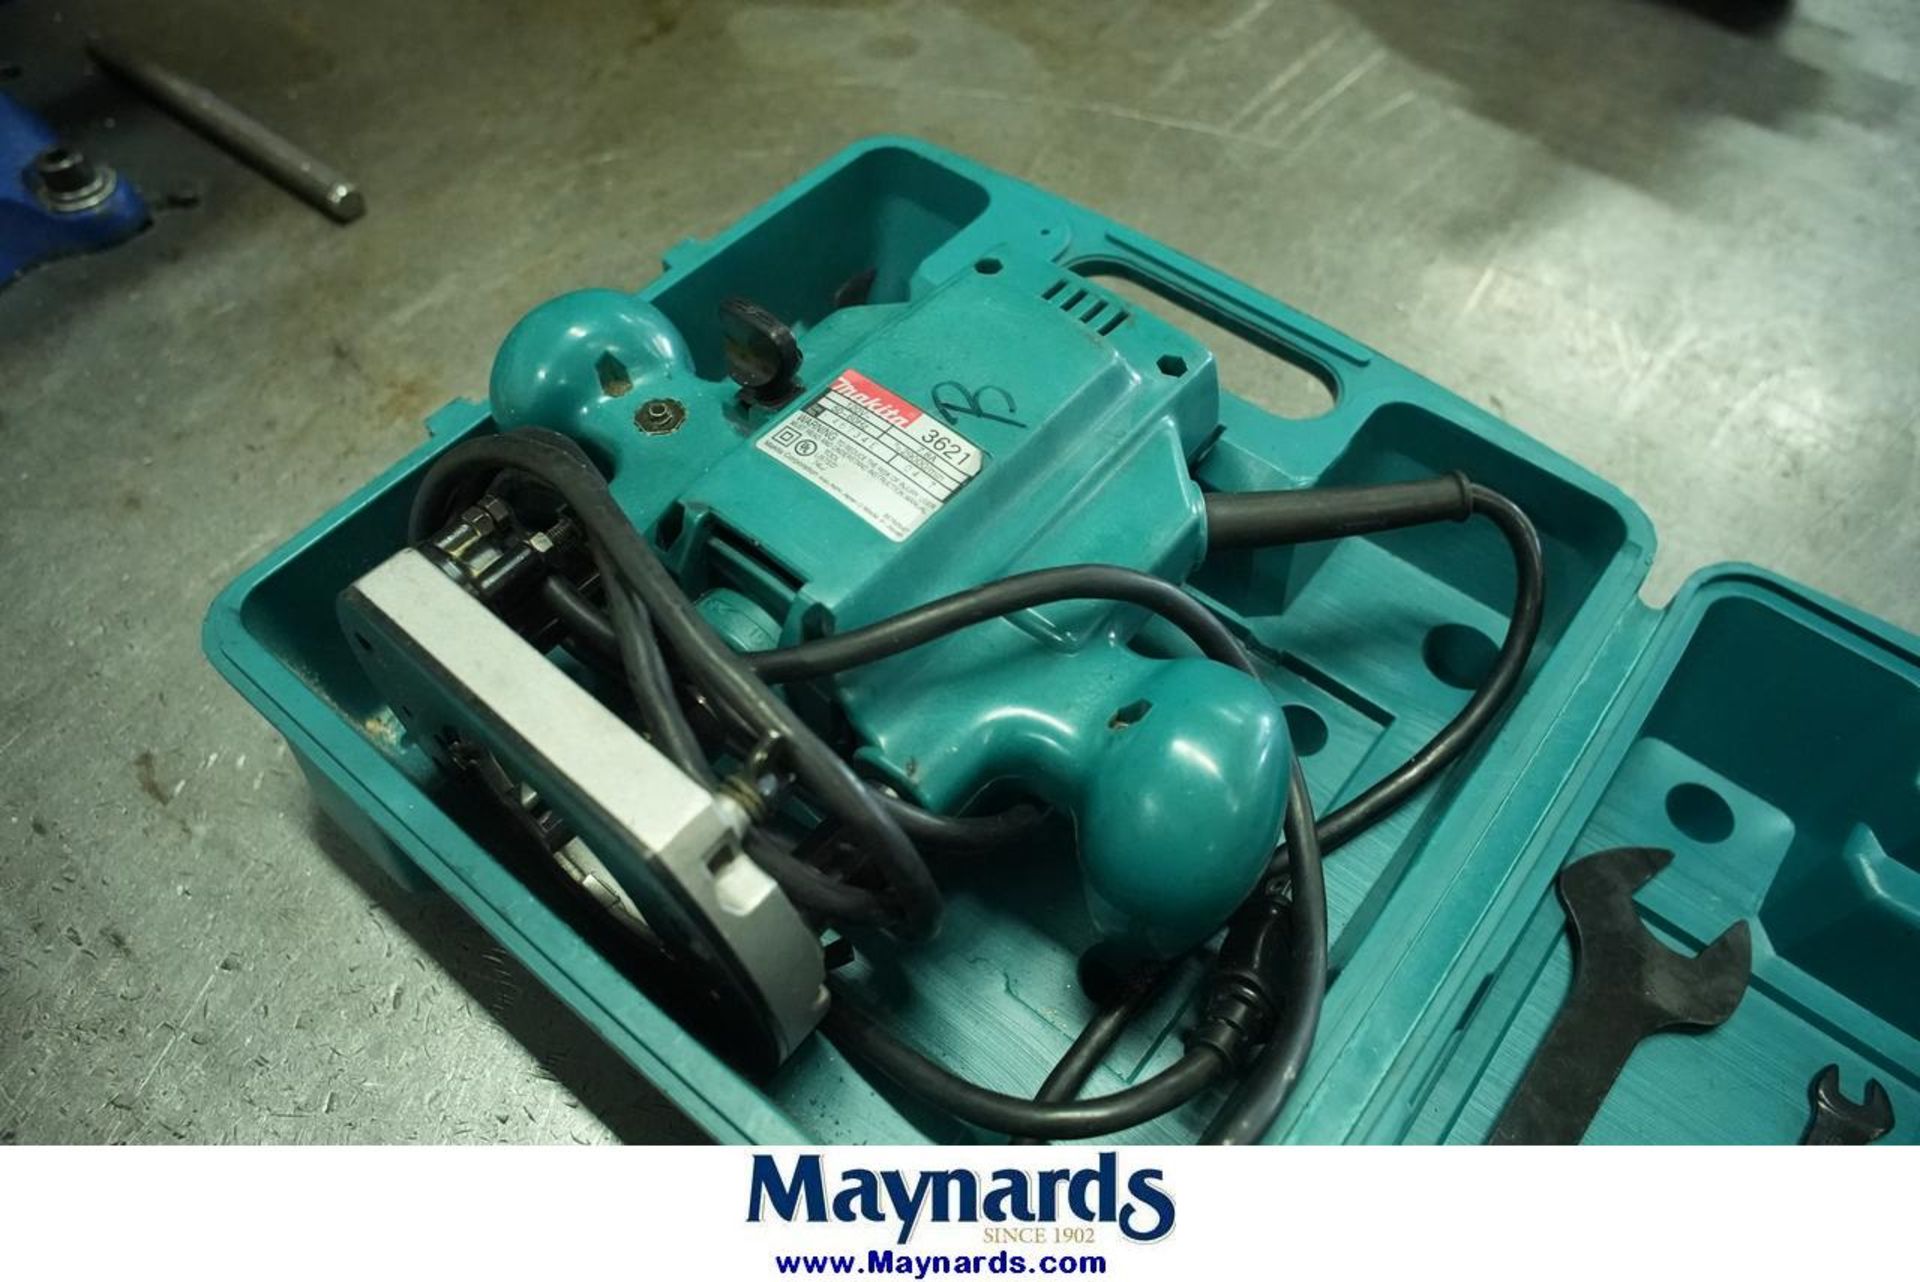 Makita Model 3621 Router w/ Case - Image 2 of 3